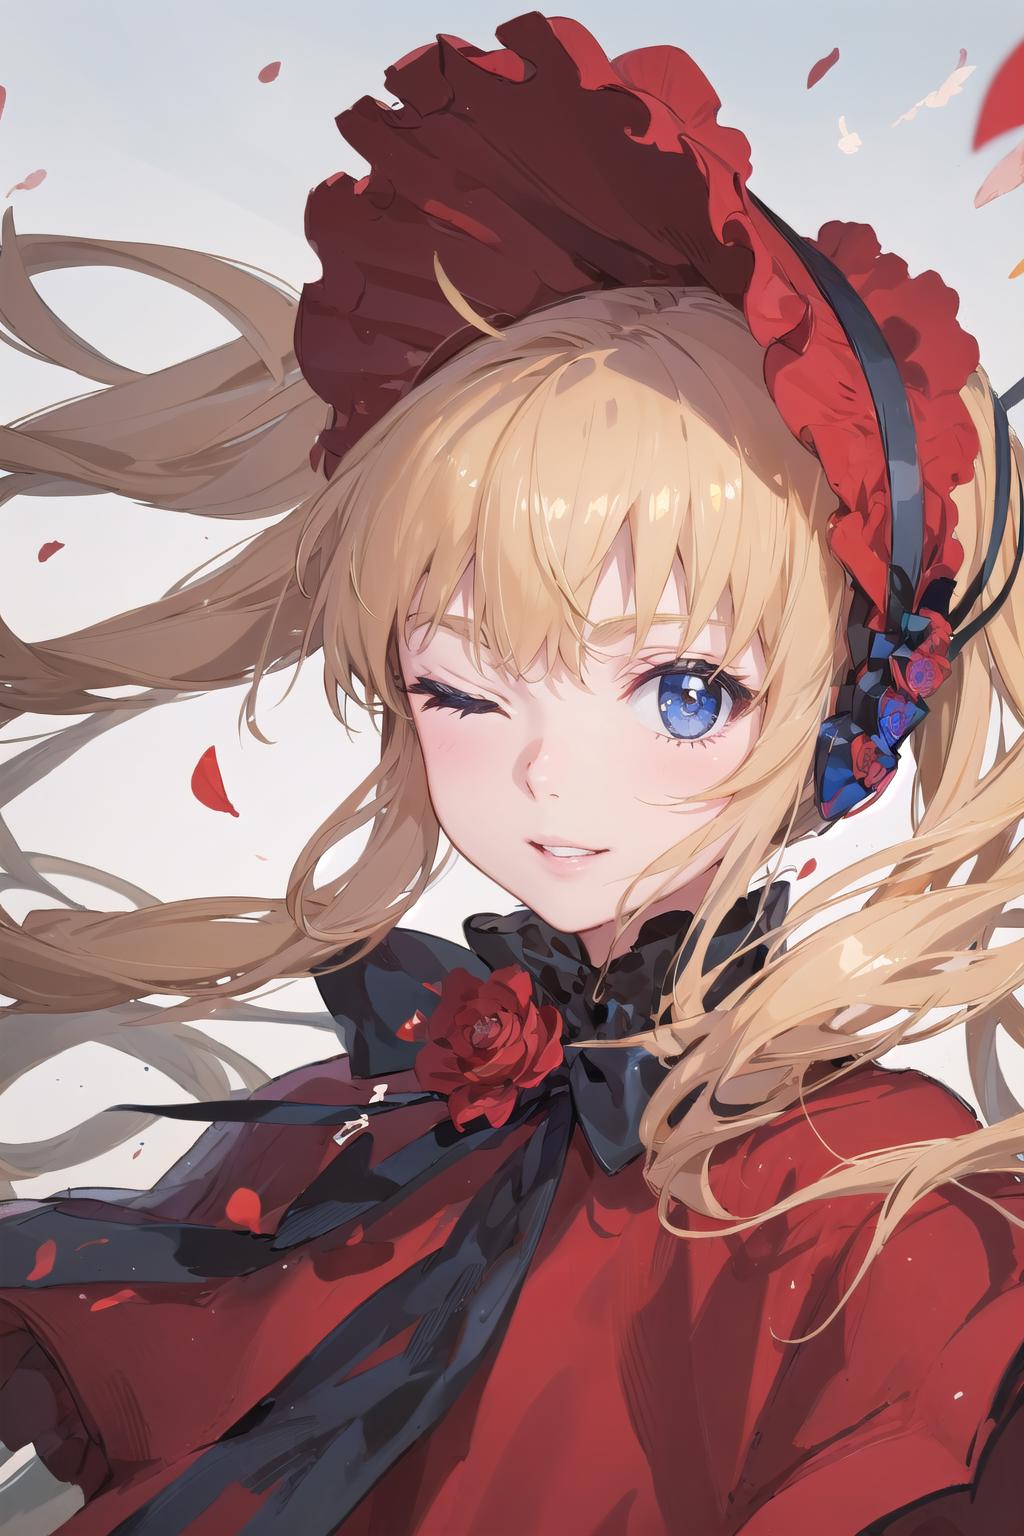 Rozen Maiden/ローゼンメイデン-Shinku/真紅(With multires noise version) image by L_A_X